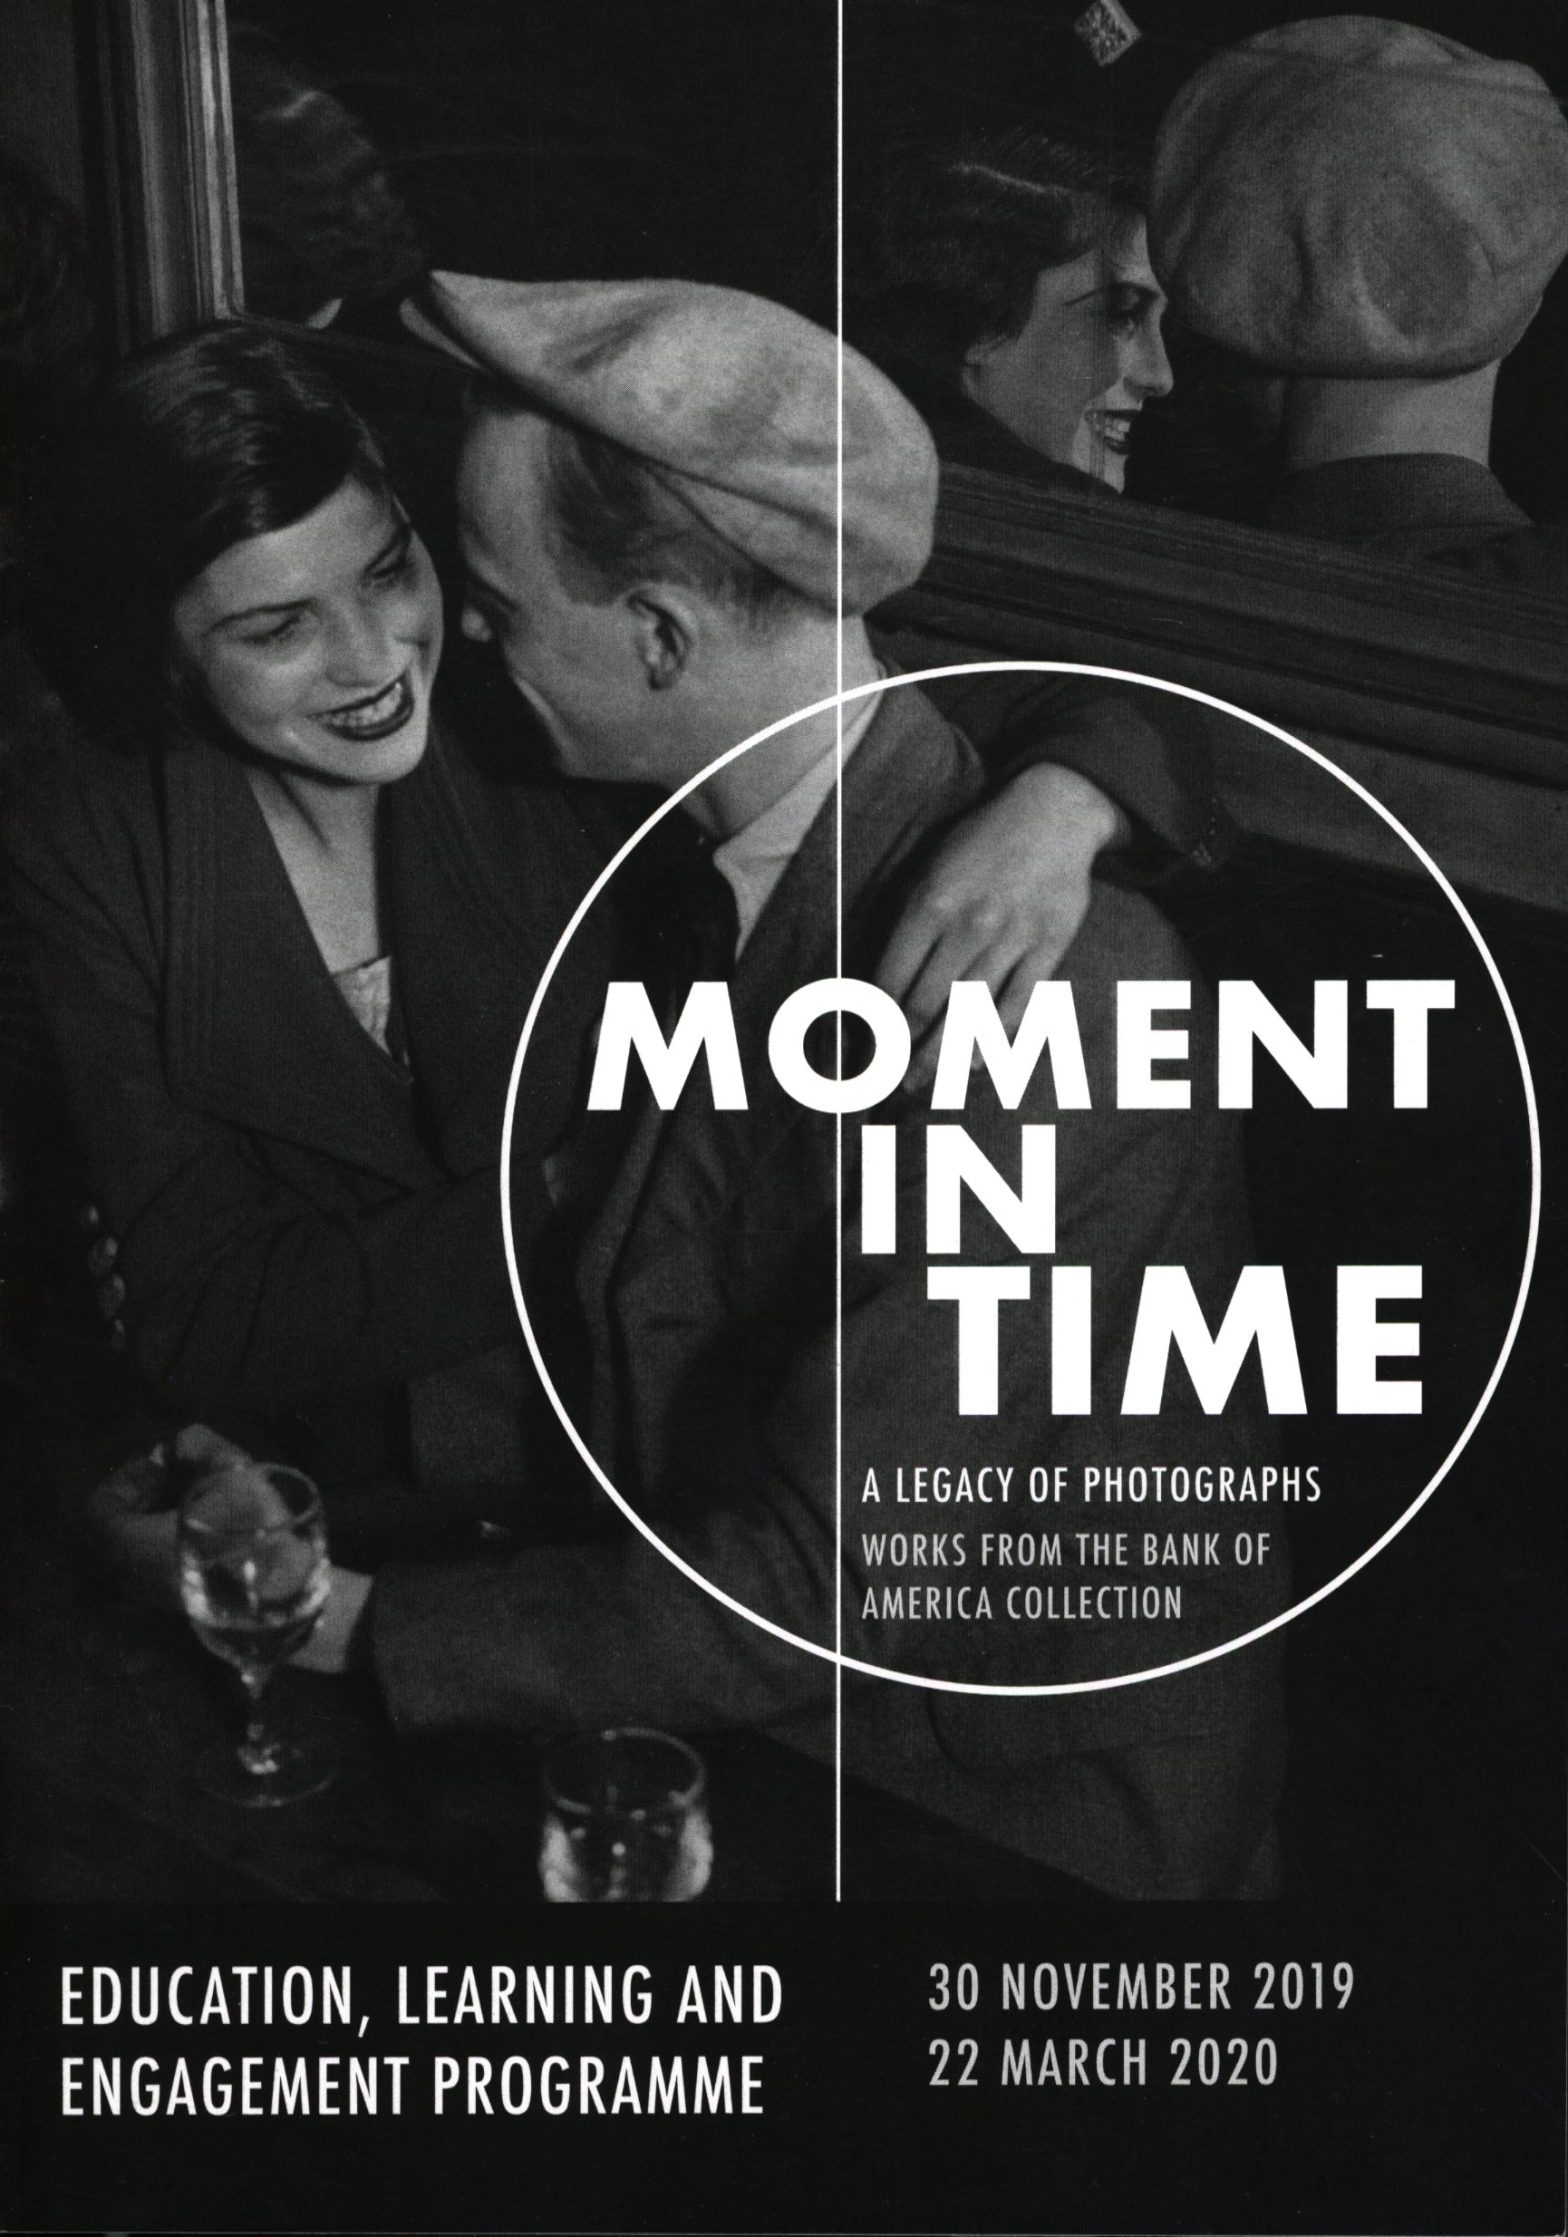 Moment in Time: A Legacy of Photographs National Gallery of Ireland